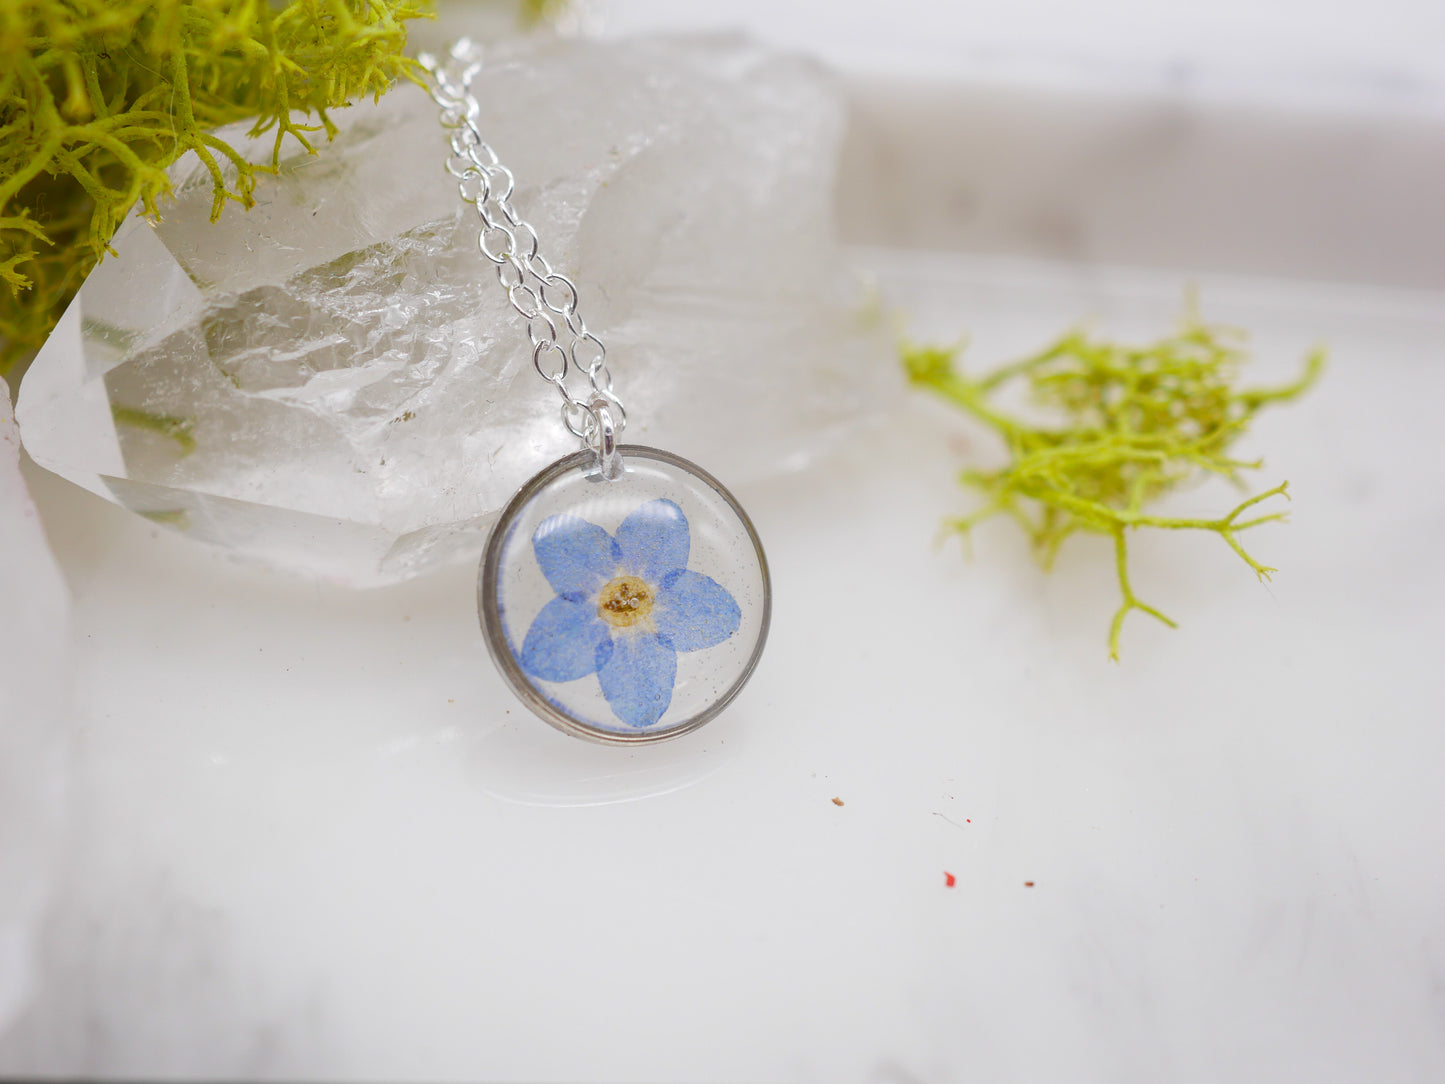 Forget me not tiny charm necklace